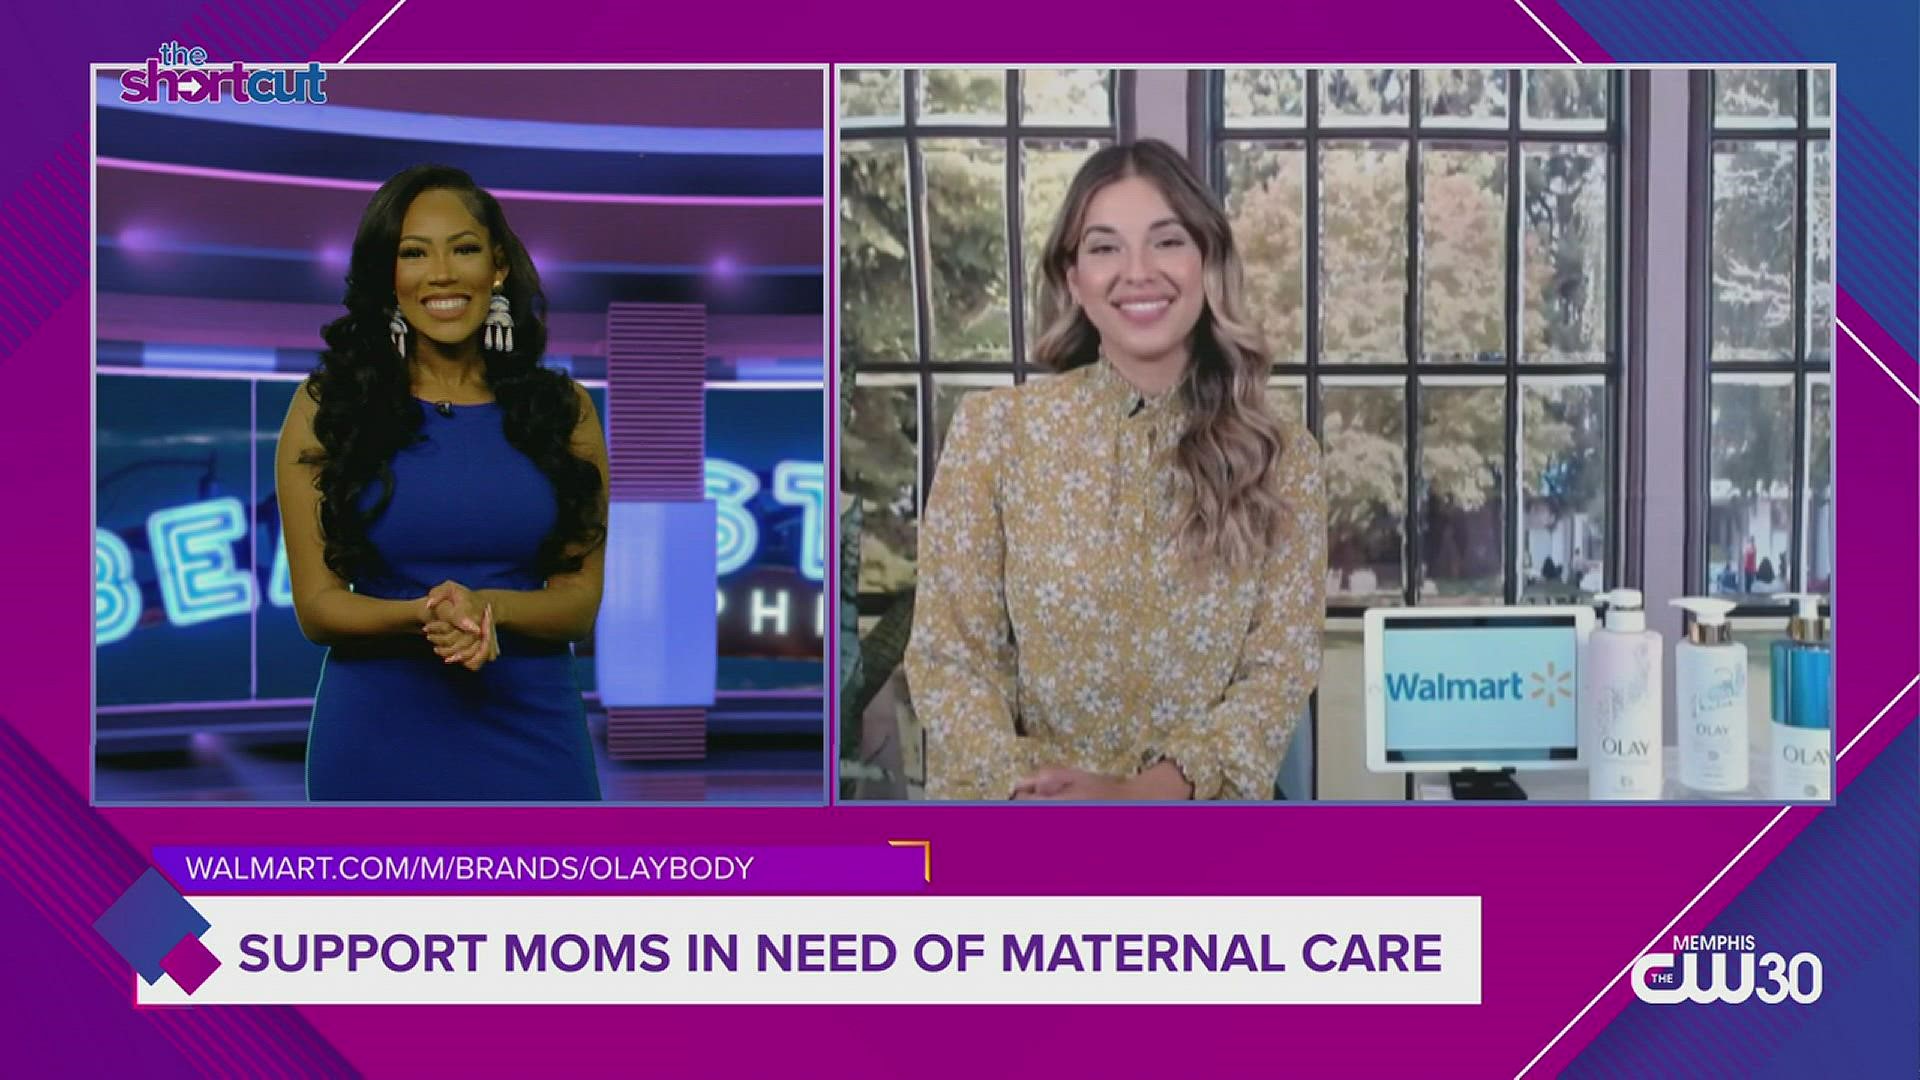 Did you know that 800 women worldwide everyday die from childbirth complications? Find out how your Olay purchases from Walmart can make pregnancy safe for women!